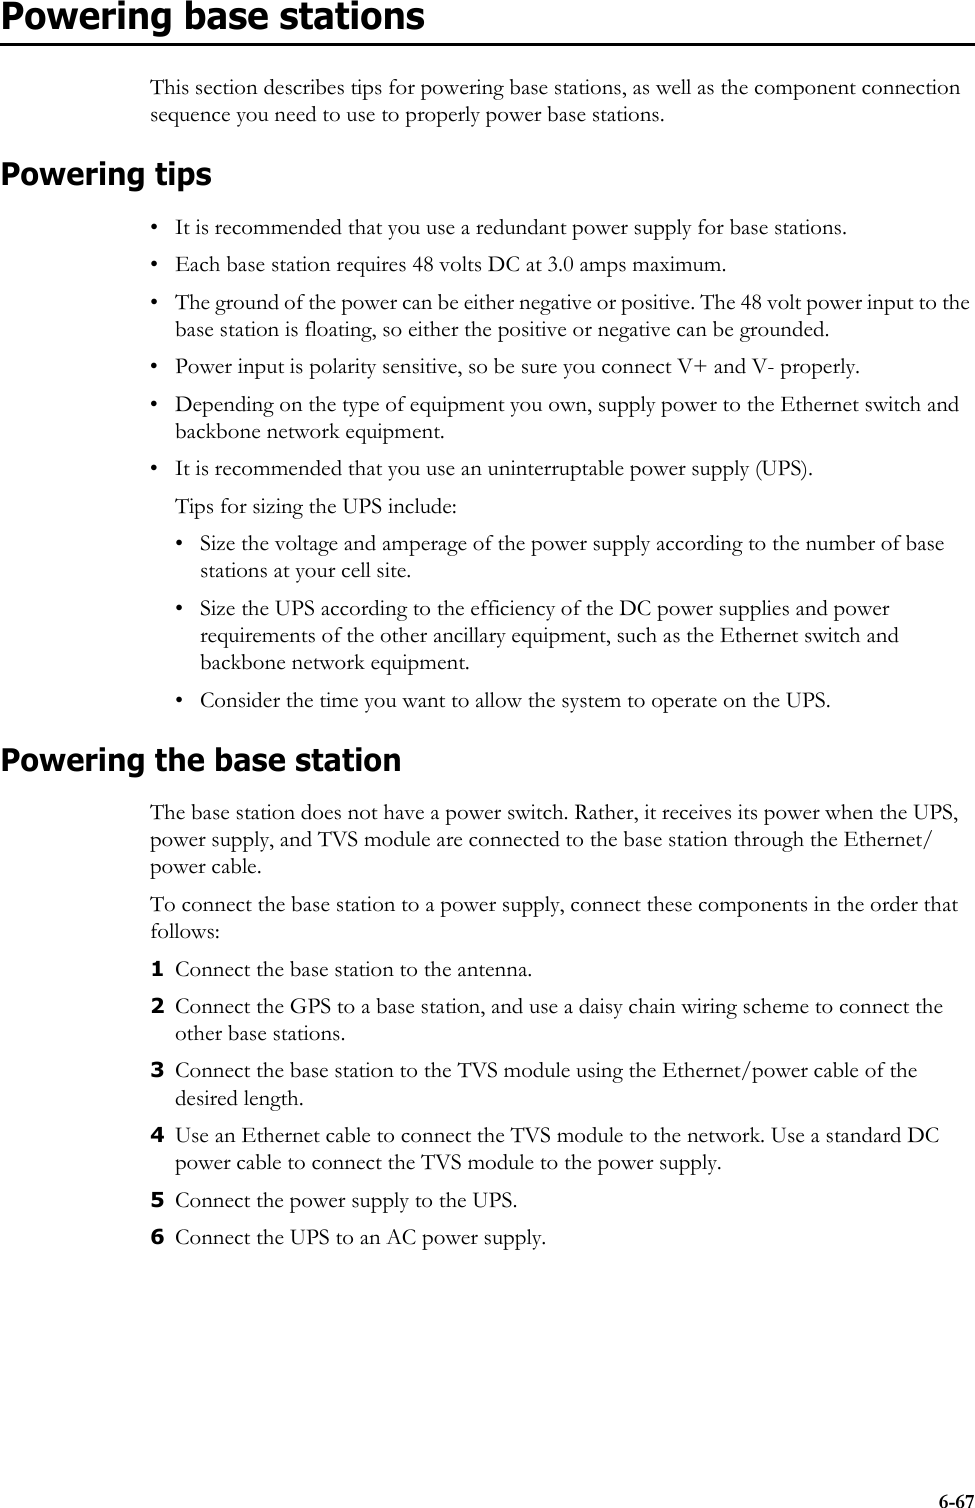 6-67Powering base stationsThis section describes tips for powering base stations, as well as the component connection sequence you need to use to properly power base stations.Powering tips• It is recommended that you use a redundant power supply for base stations. • Each base station requires 48 volts DC at 3.0 amps maximum. • The ground of the power can be either negative or positive. The 48 volt power input to the base station is floating, so either the positive or negative can be grounded. • Power input is polarity sensitive, so be sure you connect V+ and V- properly.• Depending on the type of equipment you own, supply power to the Ethernet switch and backbone network equipment.• It is recommended that you use an uninterruptable power supply (UPS).Tips for sizing the UPS include:• Size the voltage and amperage of the power supply according to the number of base stations at your cell site. • Size the UPS according to the efficiency of the DC power supplies and power requirements of the other ancillary equipment, such as the Ethernet switch and backbone network equipment.• Consider the time you want to allow the system to operate on the UPS.Powering the base stationThe base station does not have a power switch. Rather, it receives its power when the UPS, power supply, and TVS module are connected to the base station through the Ethernet/power cable. To connect the base station to a power supply, connect these components in the order that follows: 1Connect the base station to the antenna.2Connect the GPS to a base station, and use a daisy chain wiring scheme to connect the other base stations.3Connect the base station to the TVS module using the Ethernet/power cable of the desired length.4Use an Ethernet cable to connect the TVS module to the network. Use a standard DC power cable to connect the TVS module to the power supply.5Connect the power supply to the UPS. 6Connect the UPS to an AC power supply.